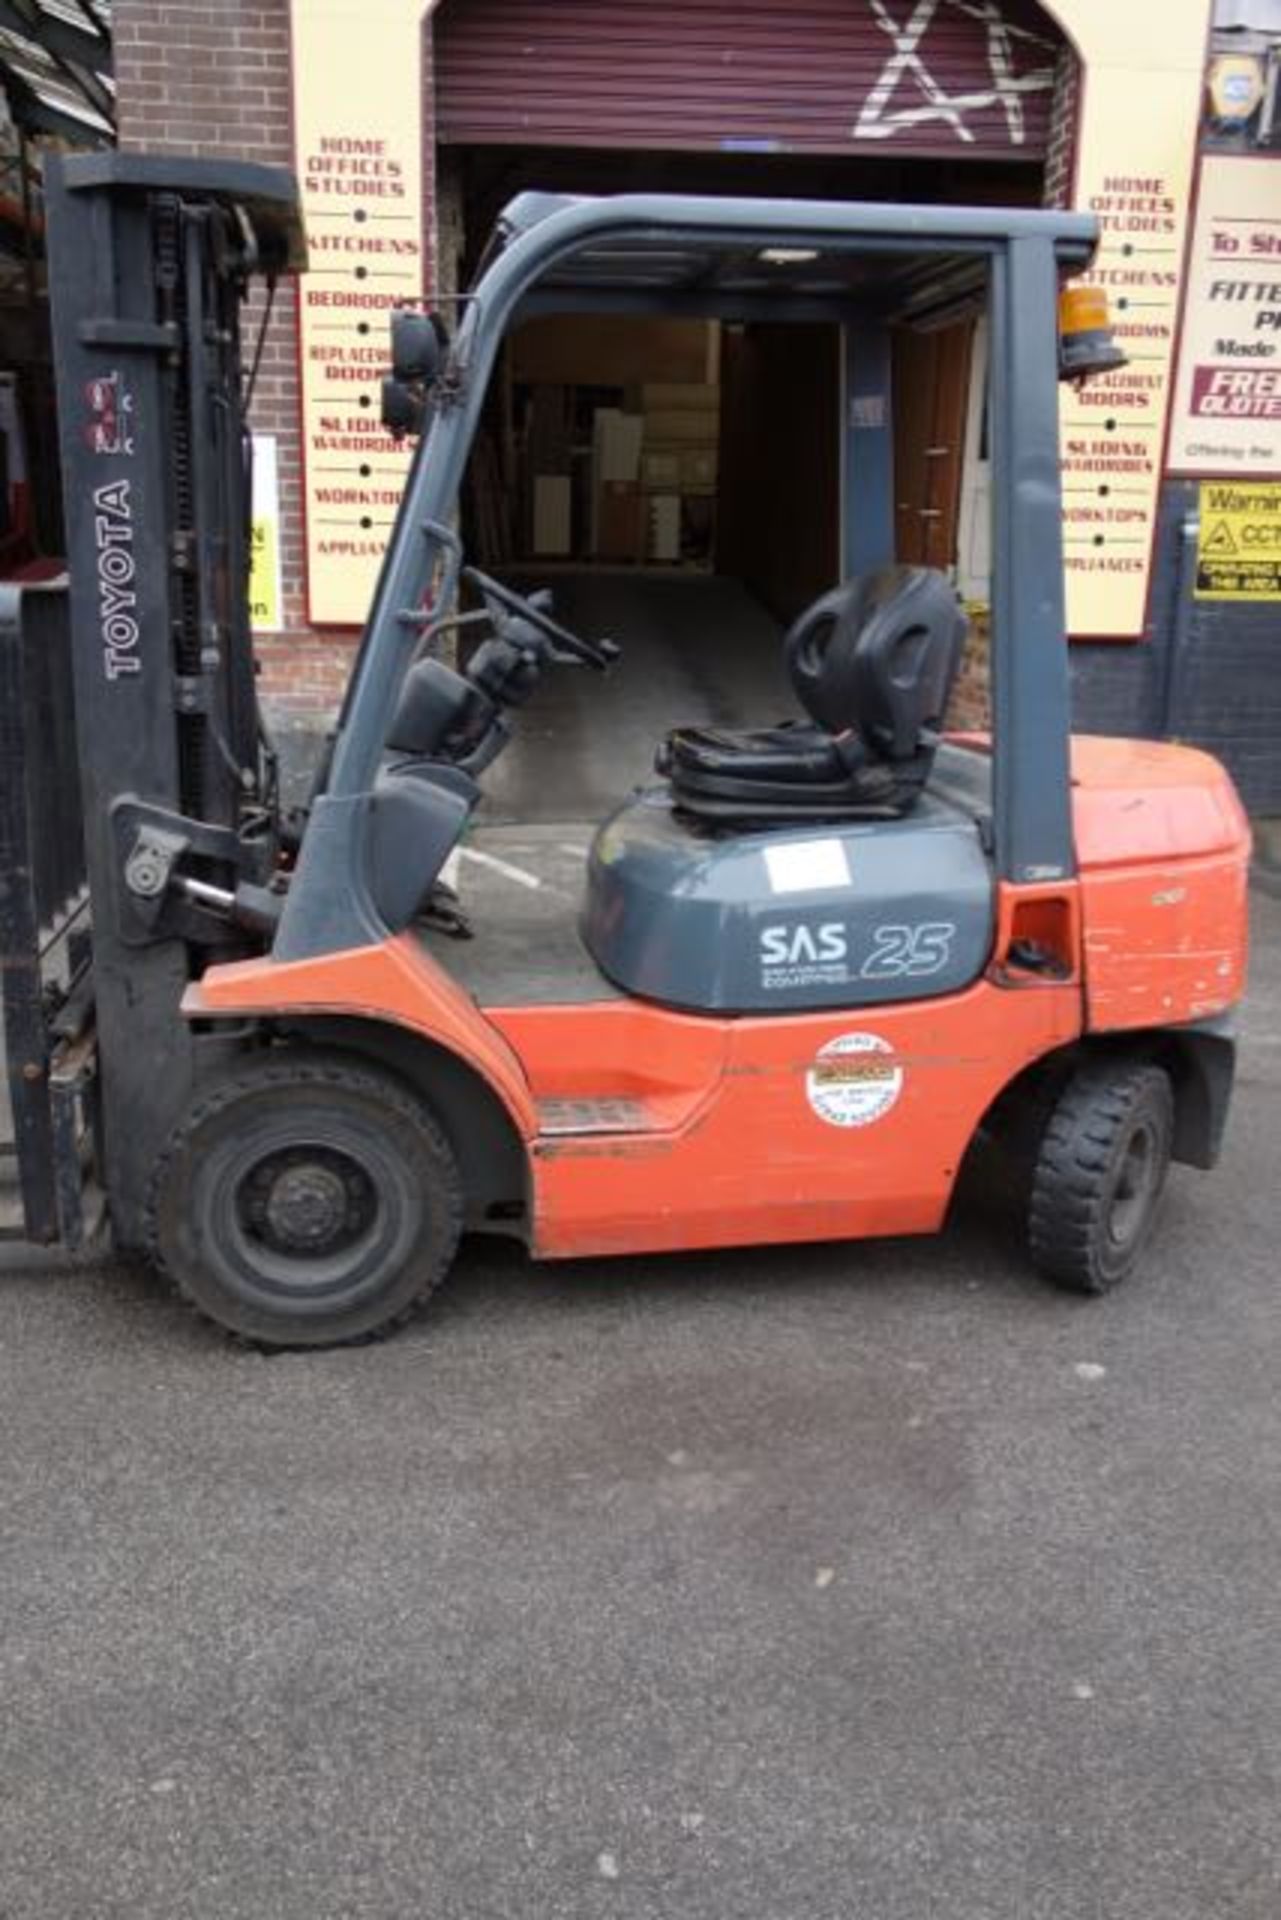 2003 Toyota 25 2.5 Tonne Diesel Forklift Truck. Max lift height. 4.1m. Side Shift. Full Working - Image 5 of 8